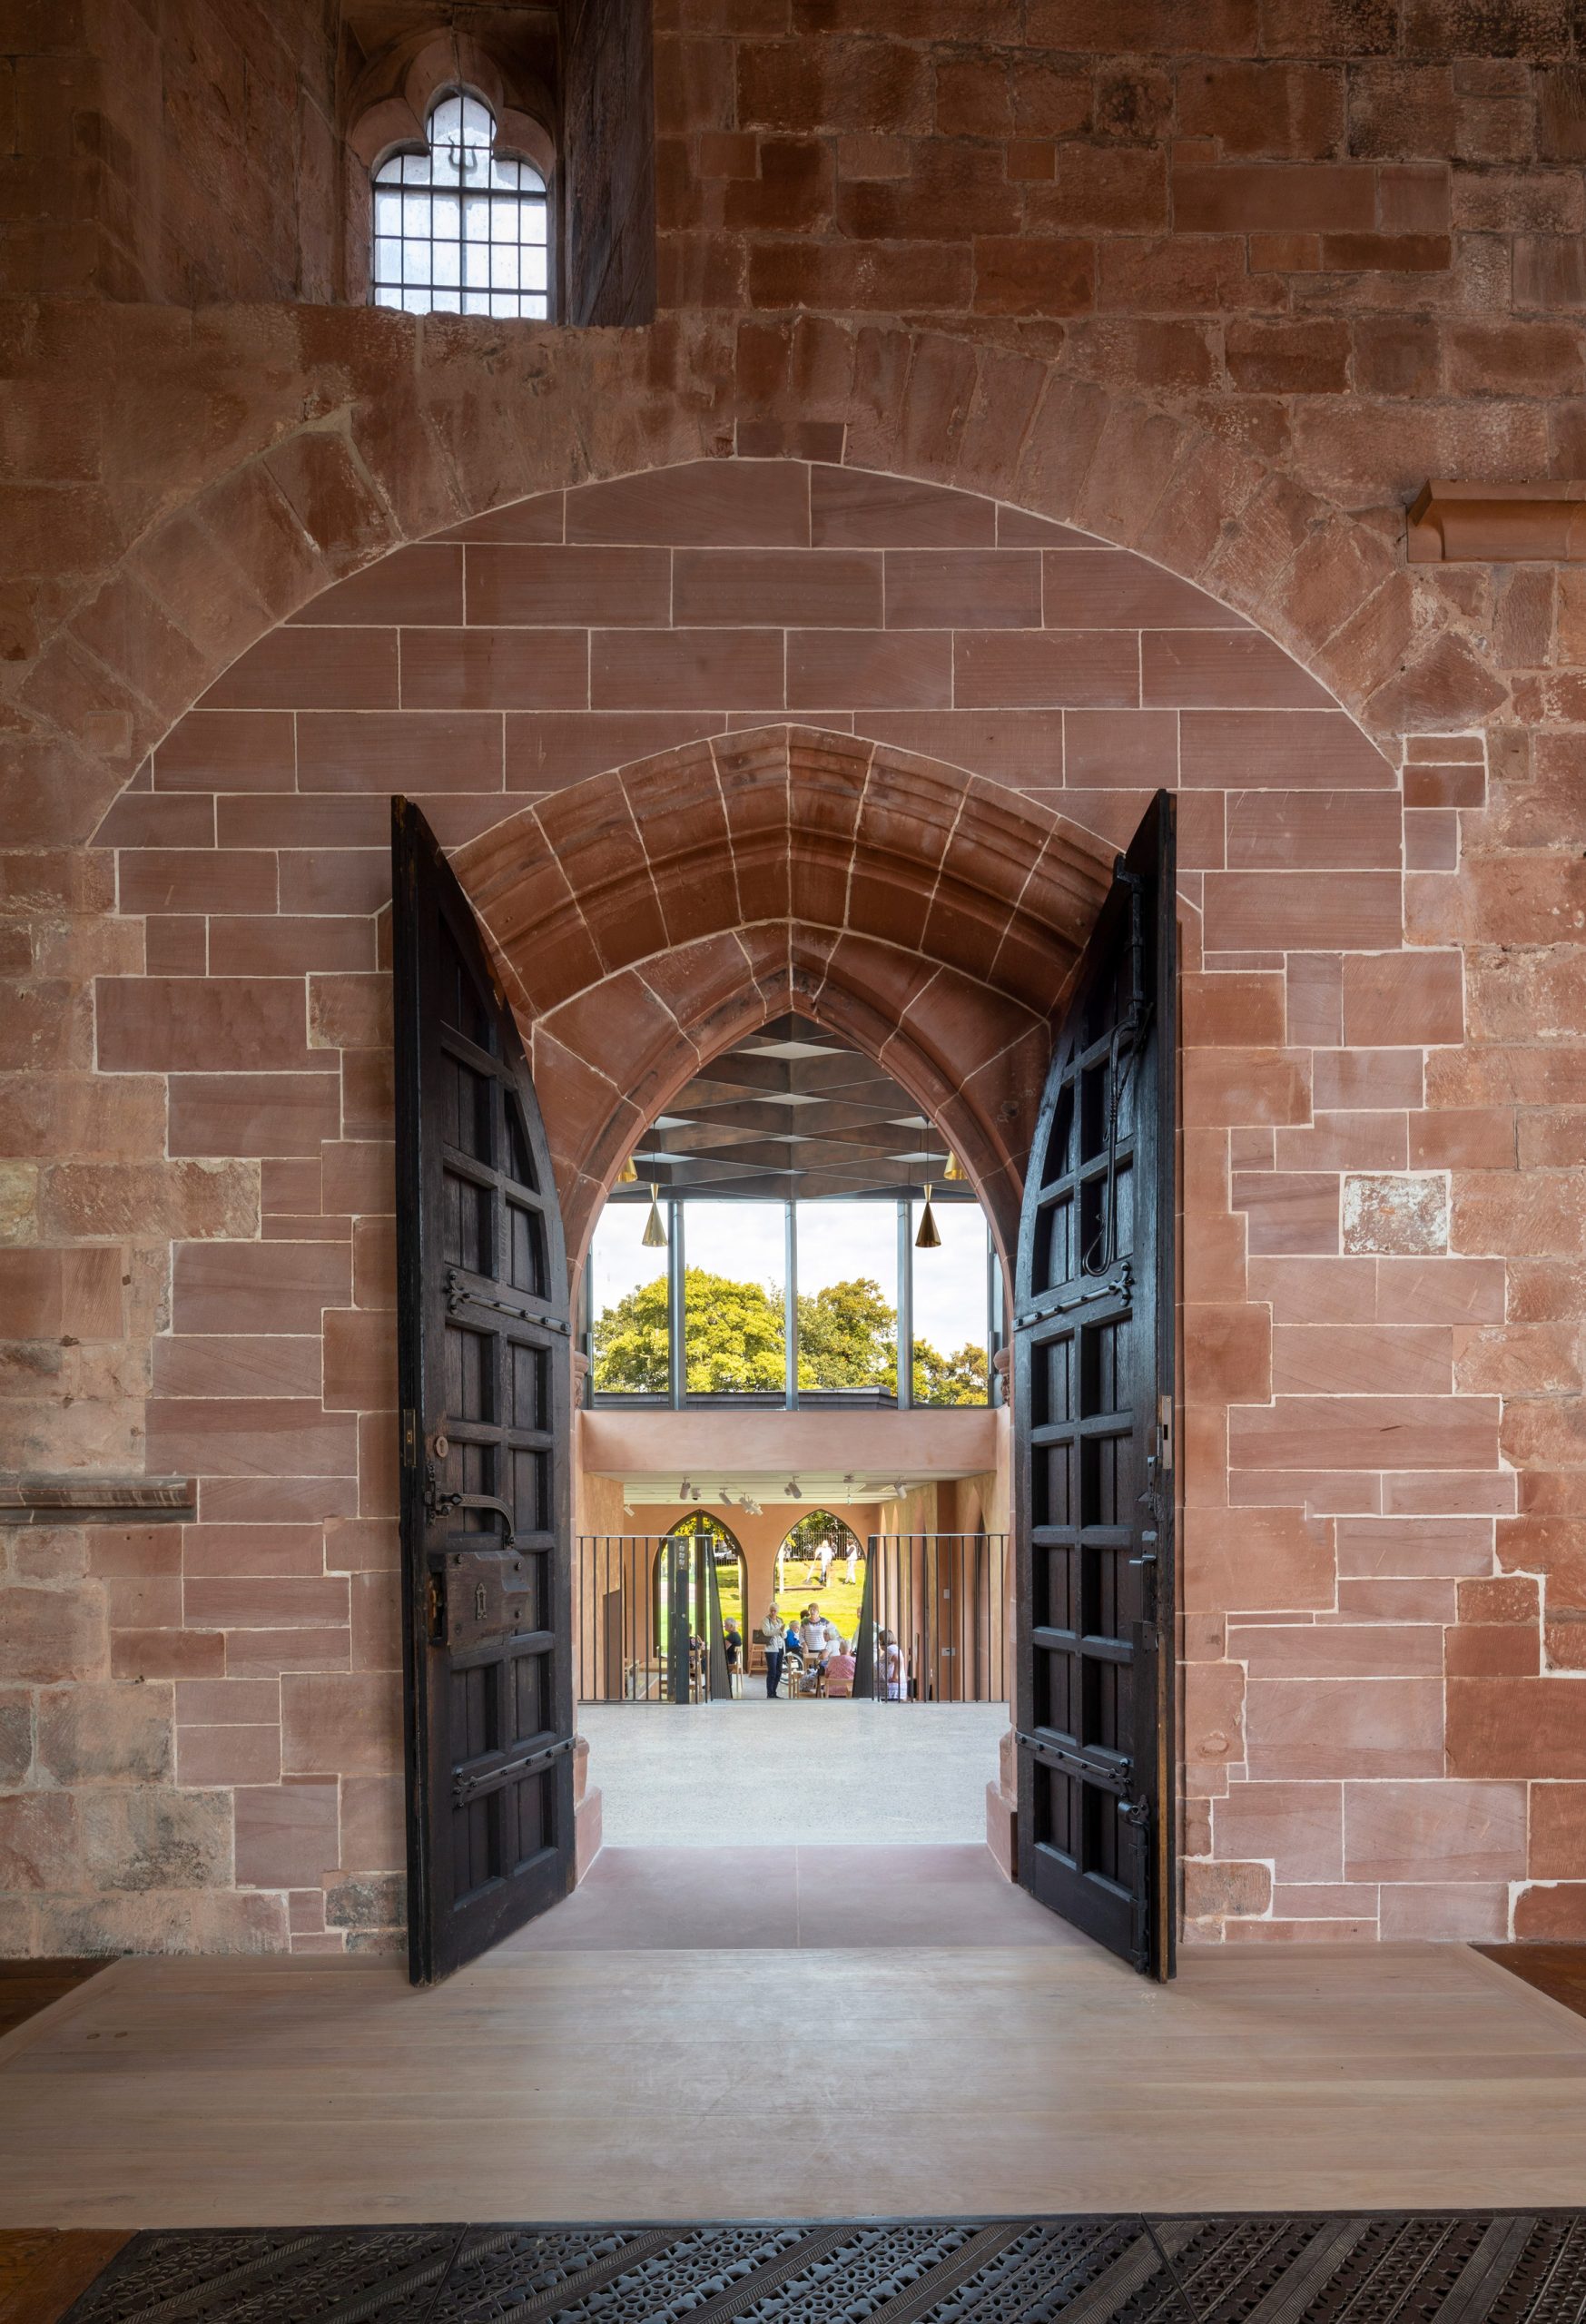 The entrance to The Fratry at Carlisle Cathedral by Feilden Fowles